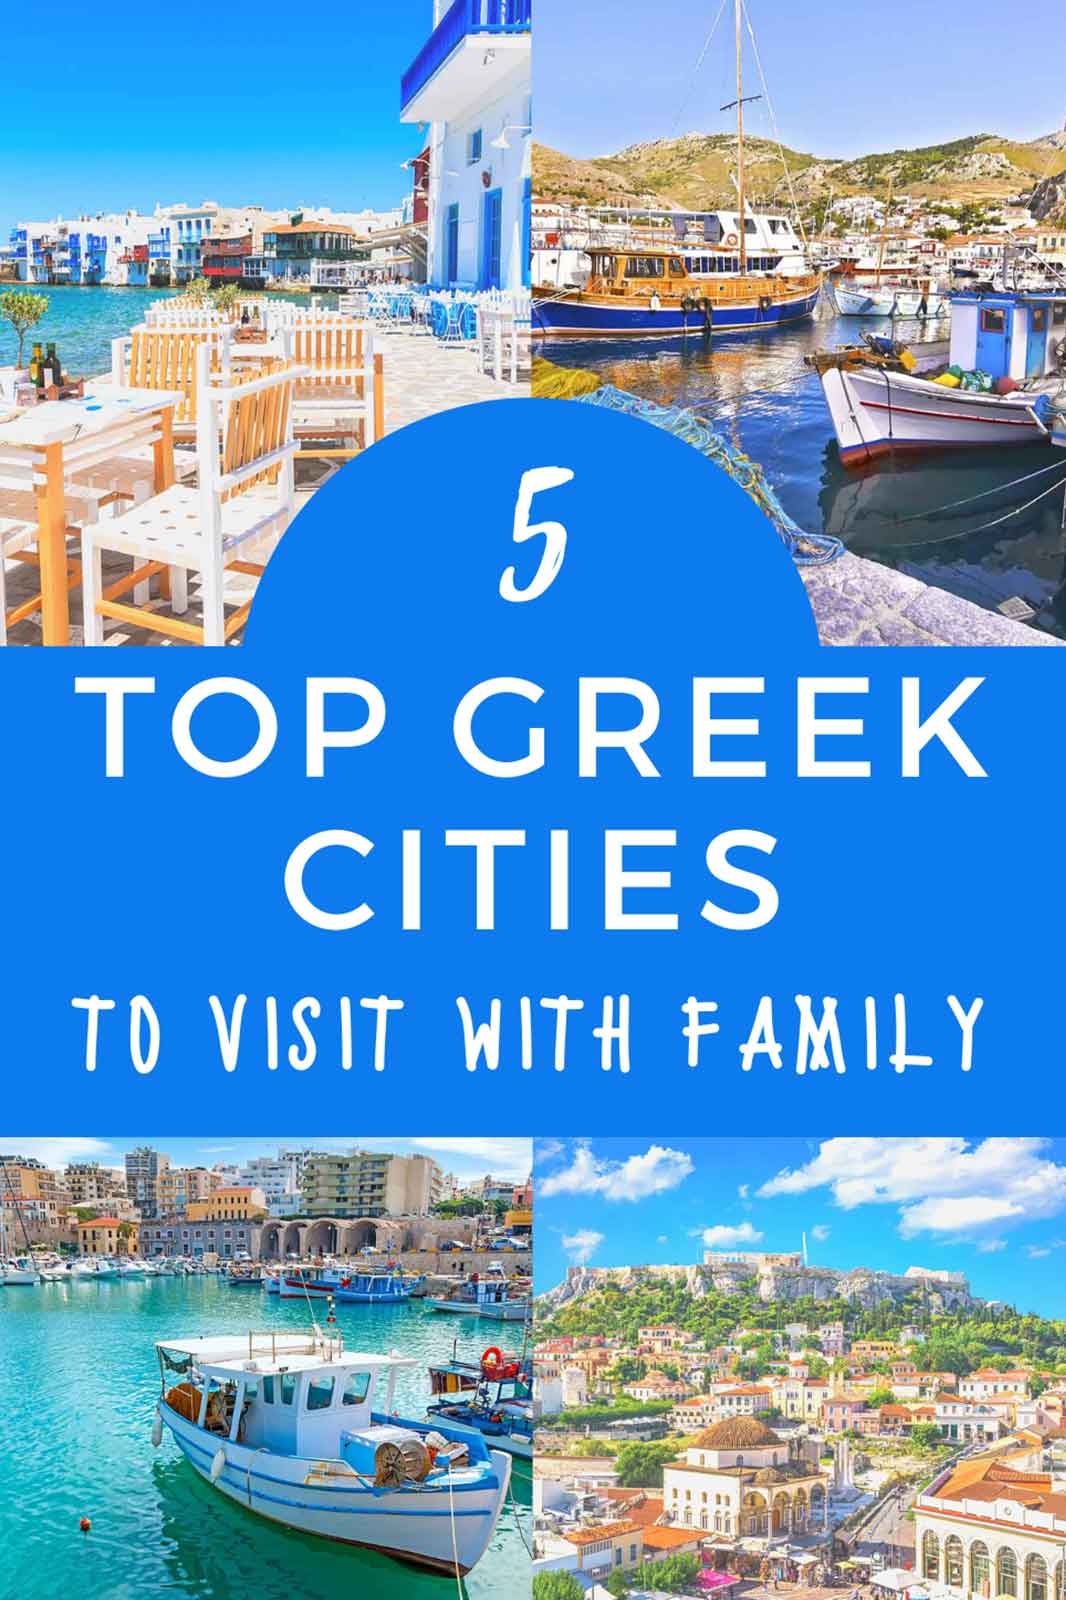 Top 5 Greek Cities Offering Something to the Whole Family